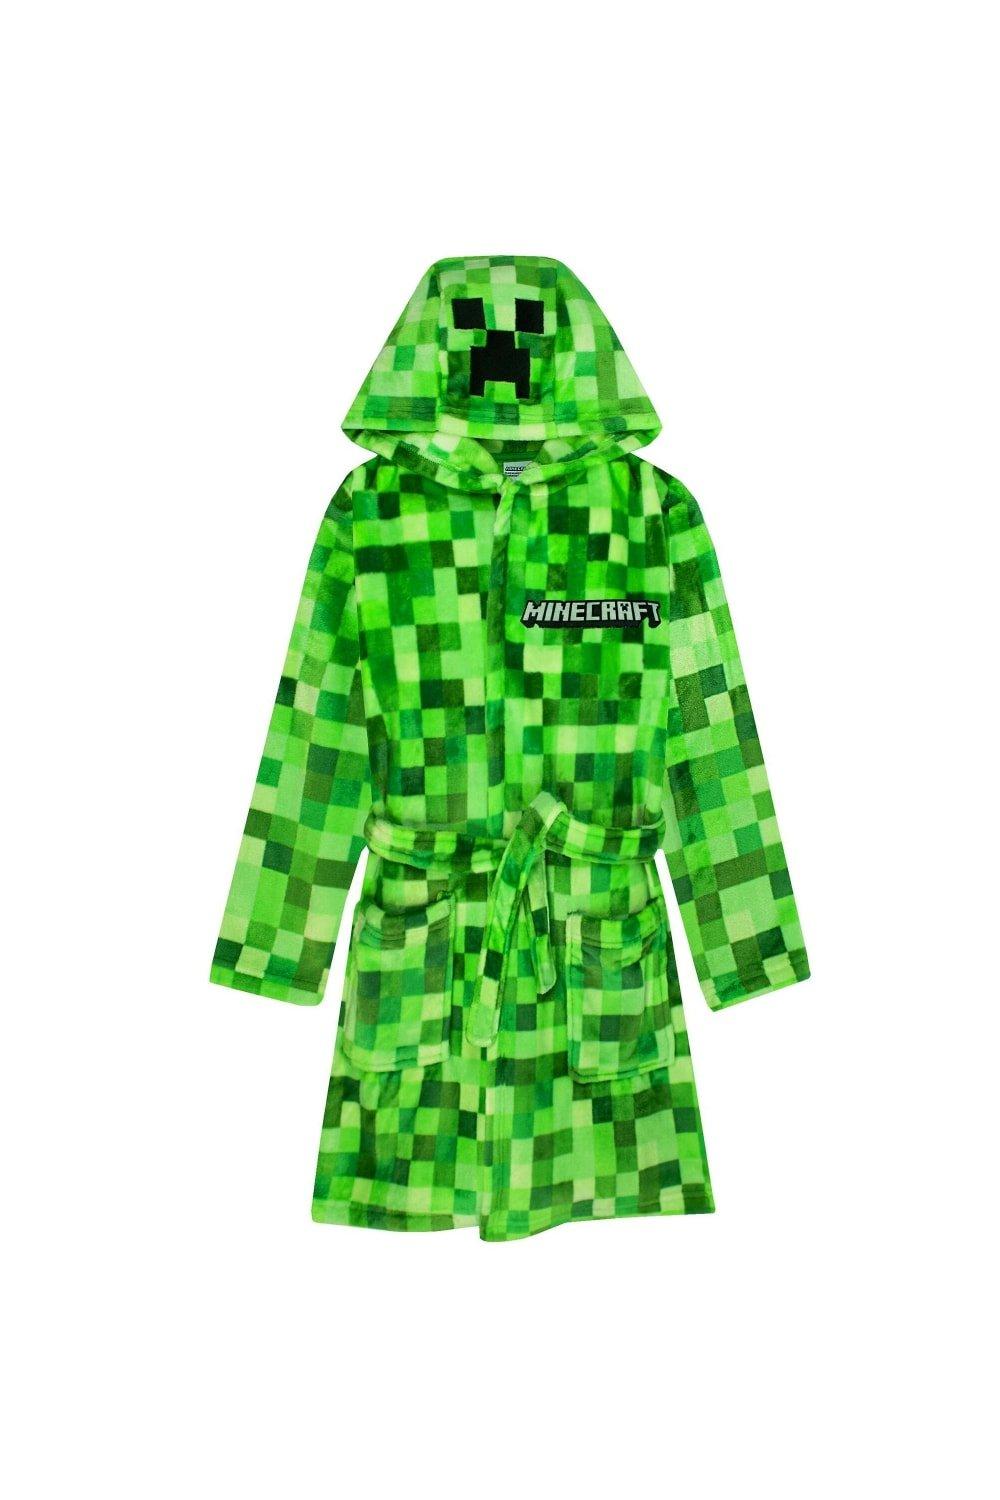 Creeper Pixel Dressing Gown